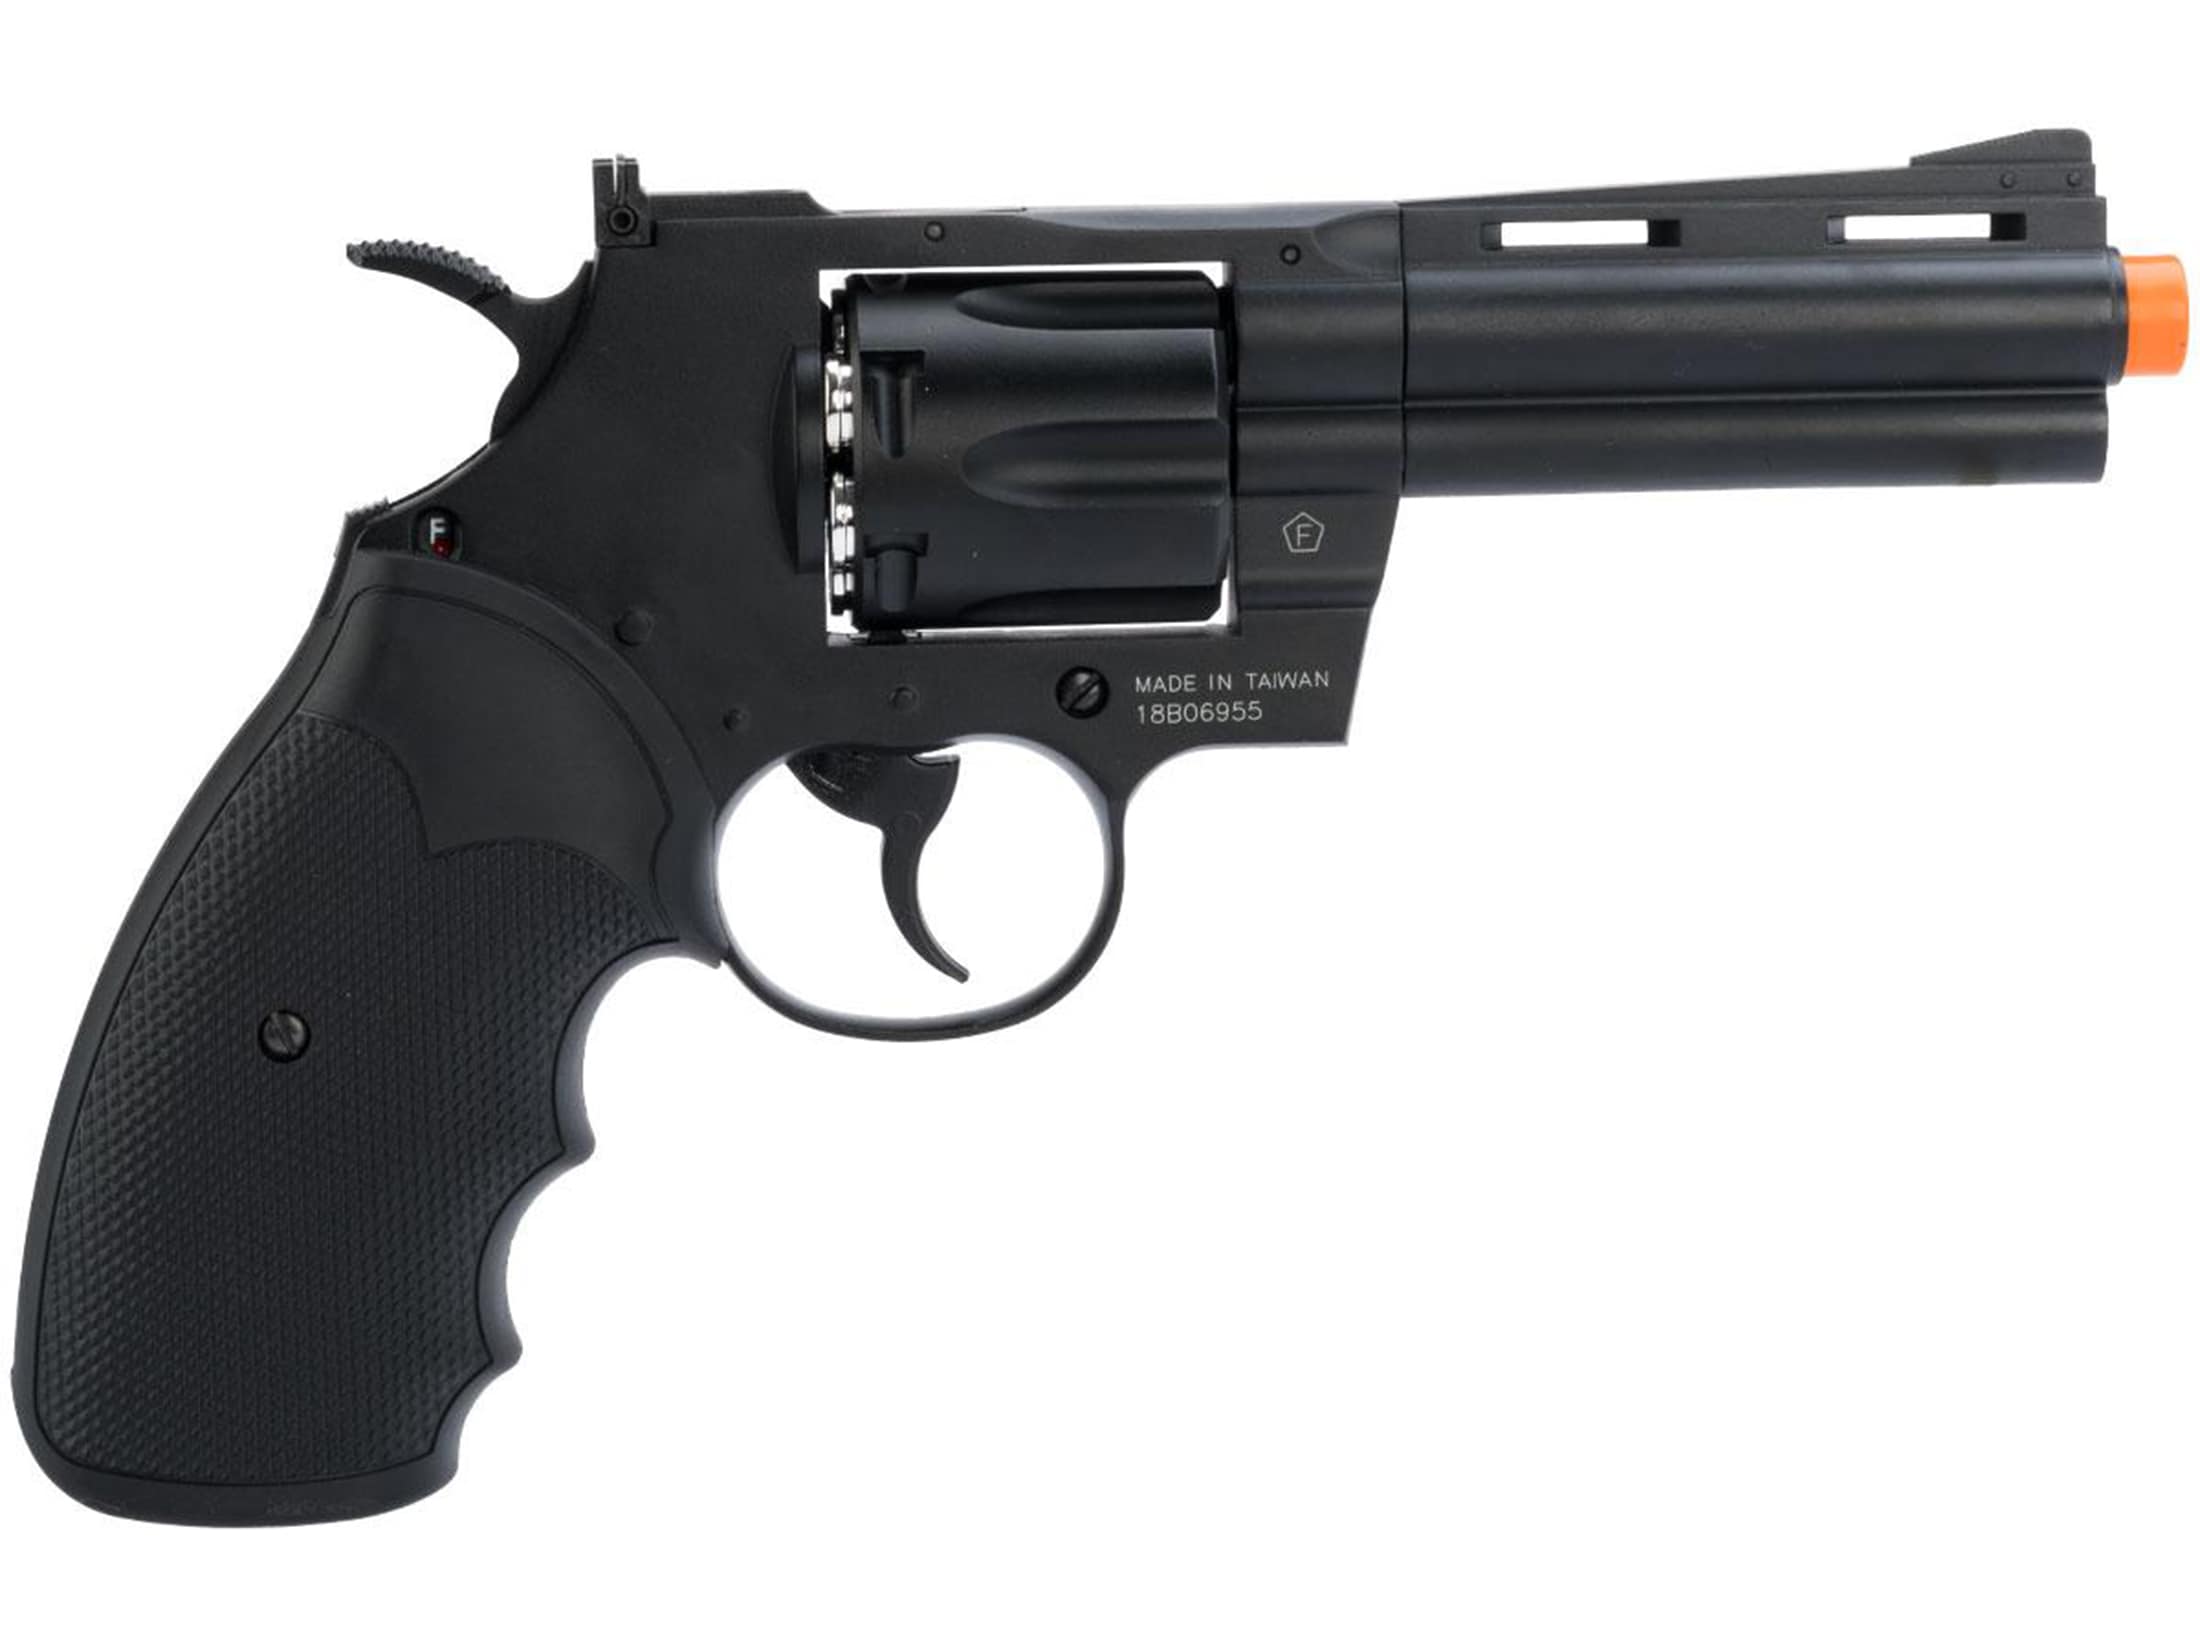 Colt 357 Python Airsoft Pistol 6mm BB CO2 Powered Semi-Automatic For Sale